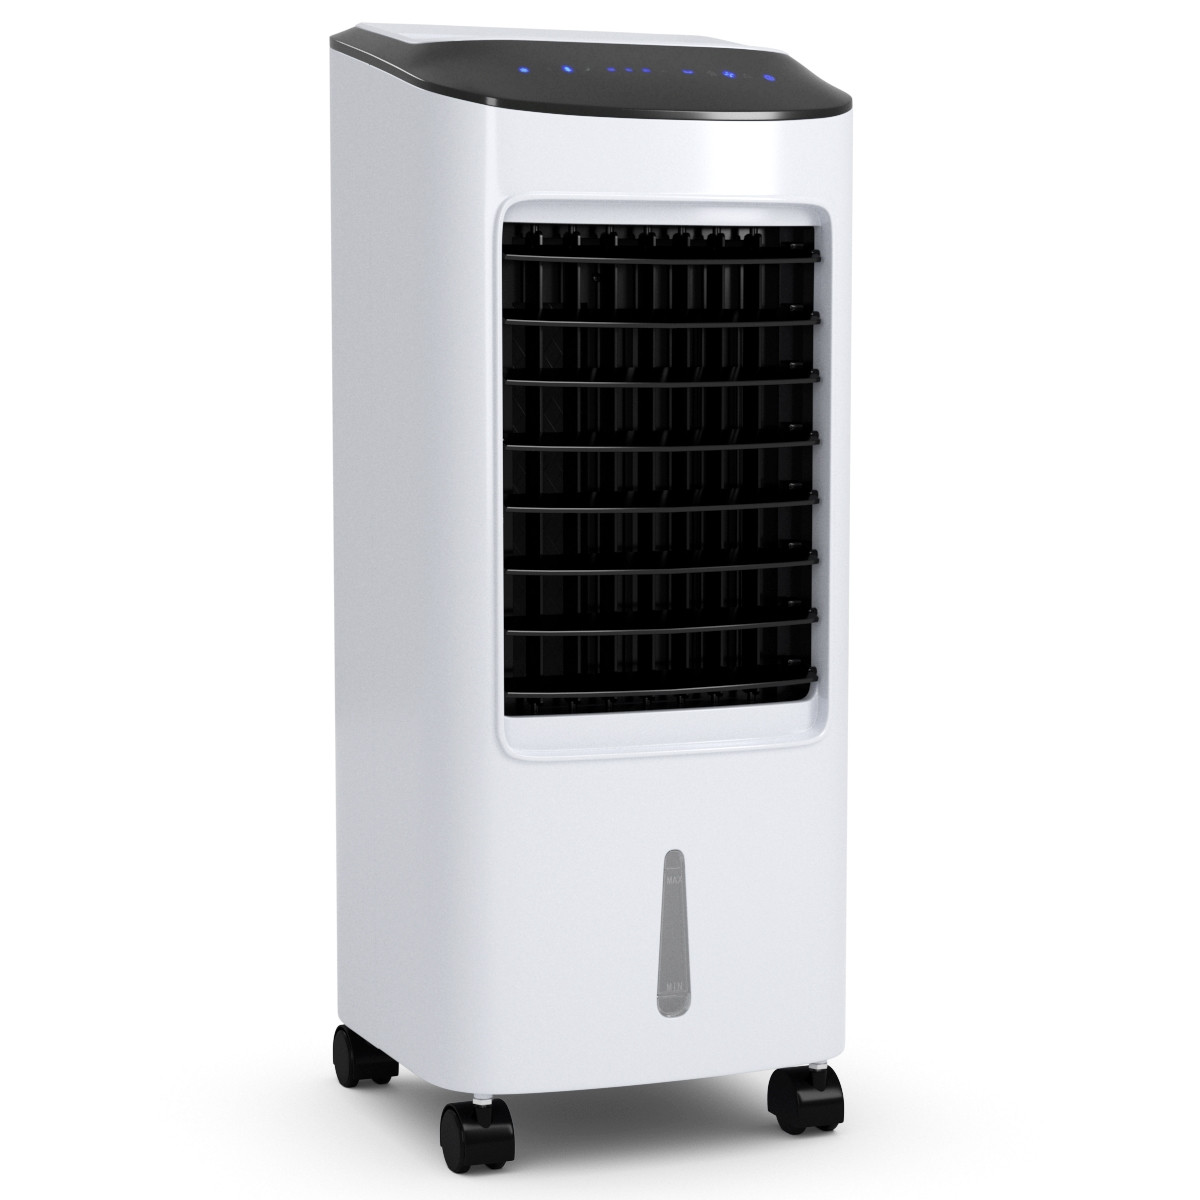 Portable air conditioner unit and 3 in 1 air cooler